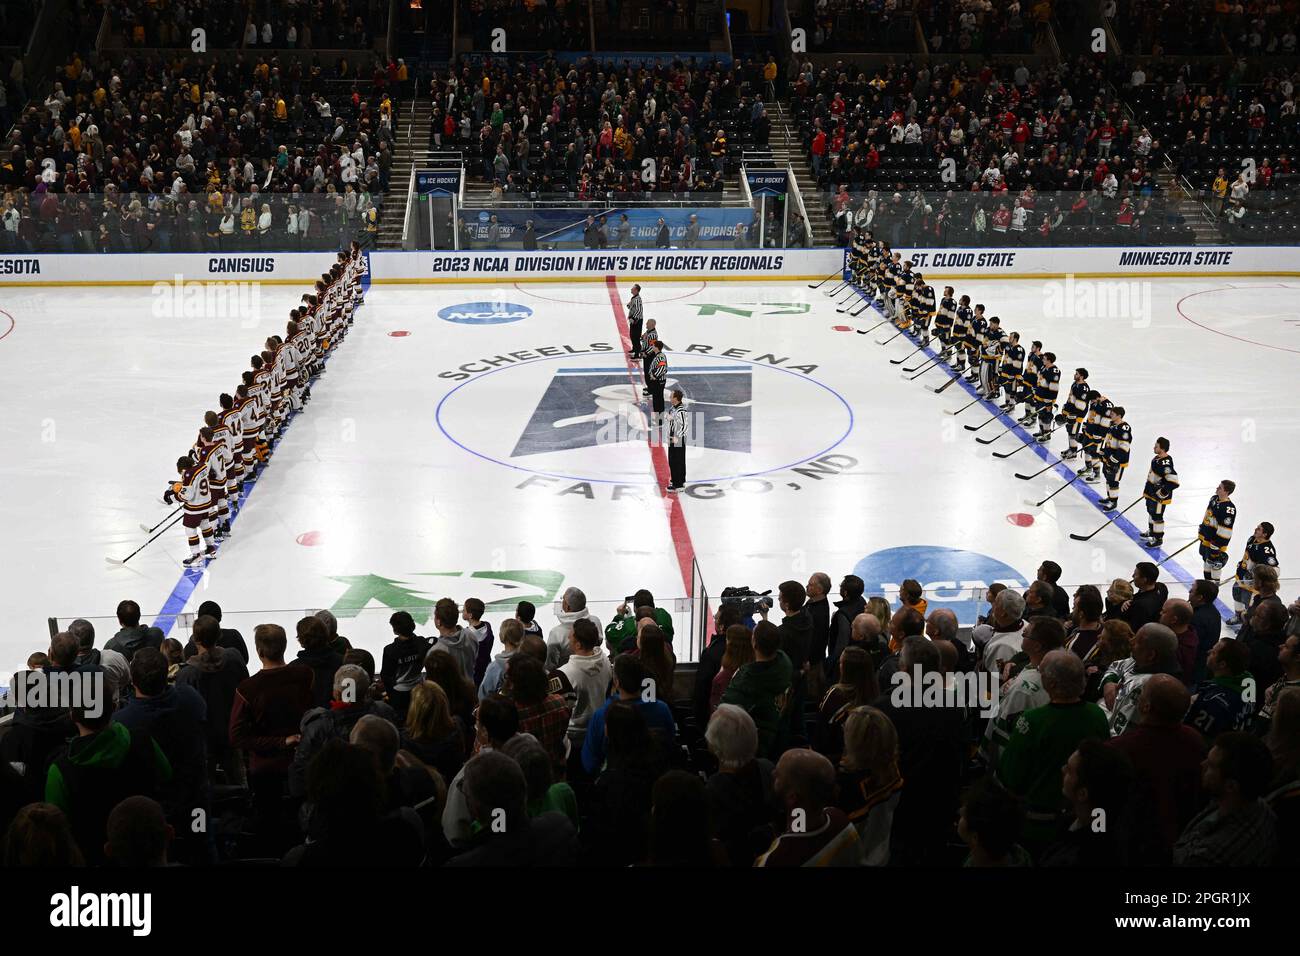 Fargo, ND on Thursday, March 23, 2023. Teams line up for the National Anthem ahead of a game at the West Regional of the NCAA men's hockey tournament between the Canisius College Golden Griffins and the University of Minnesota Golden Gophers at Scheels Arena in Fargo, ND on Thursday, March 23, 2023. Minnesota won 9-2. By Russell Hons/CSM Stock Photo